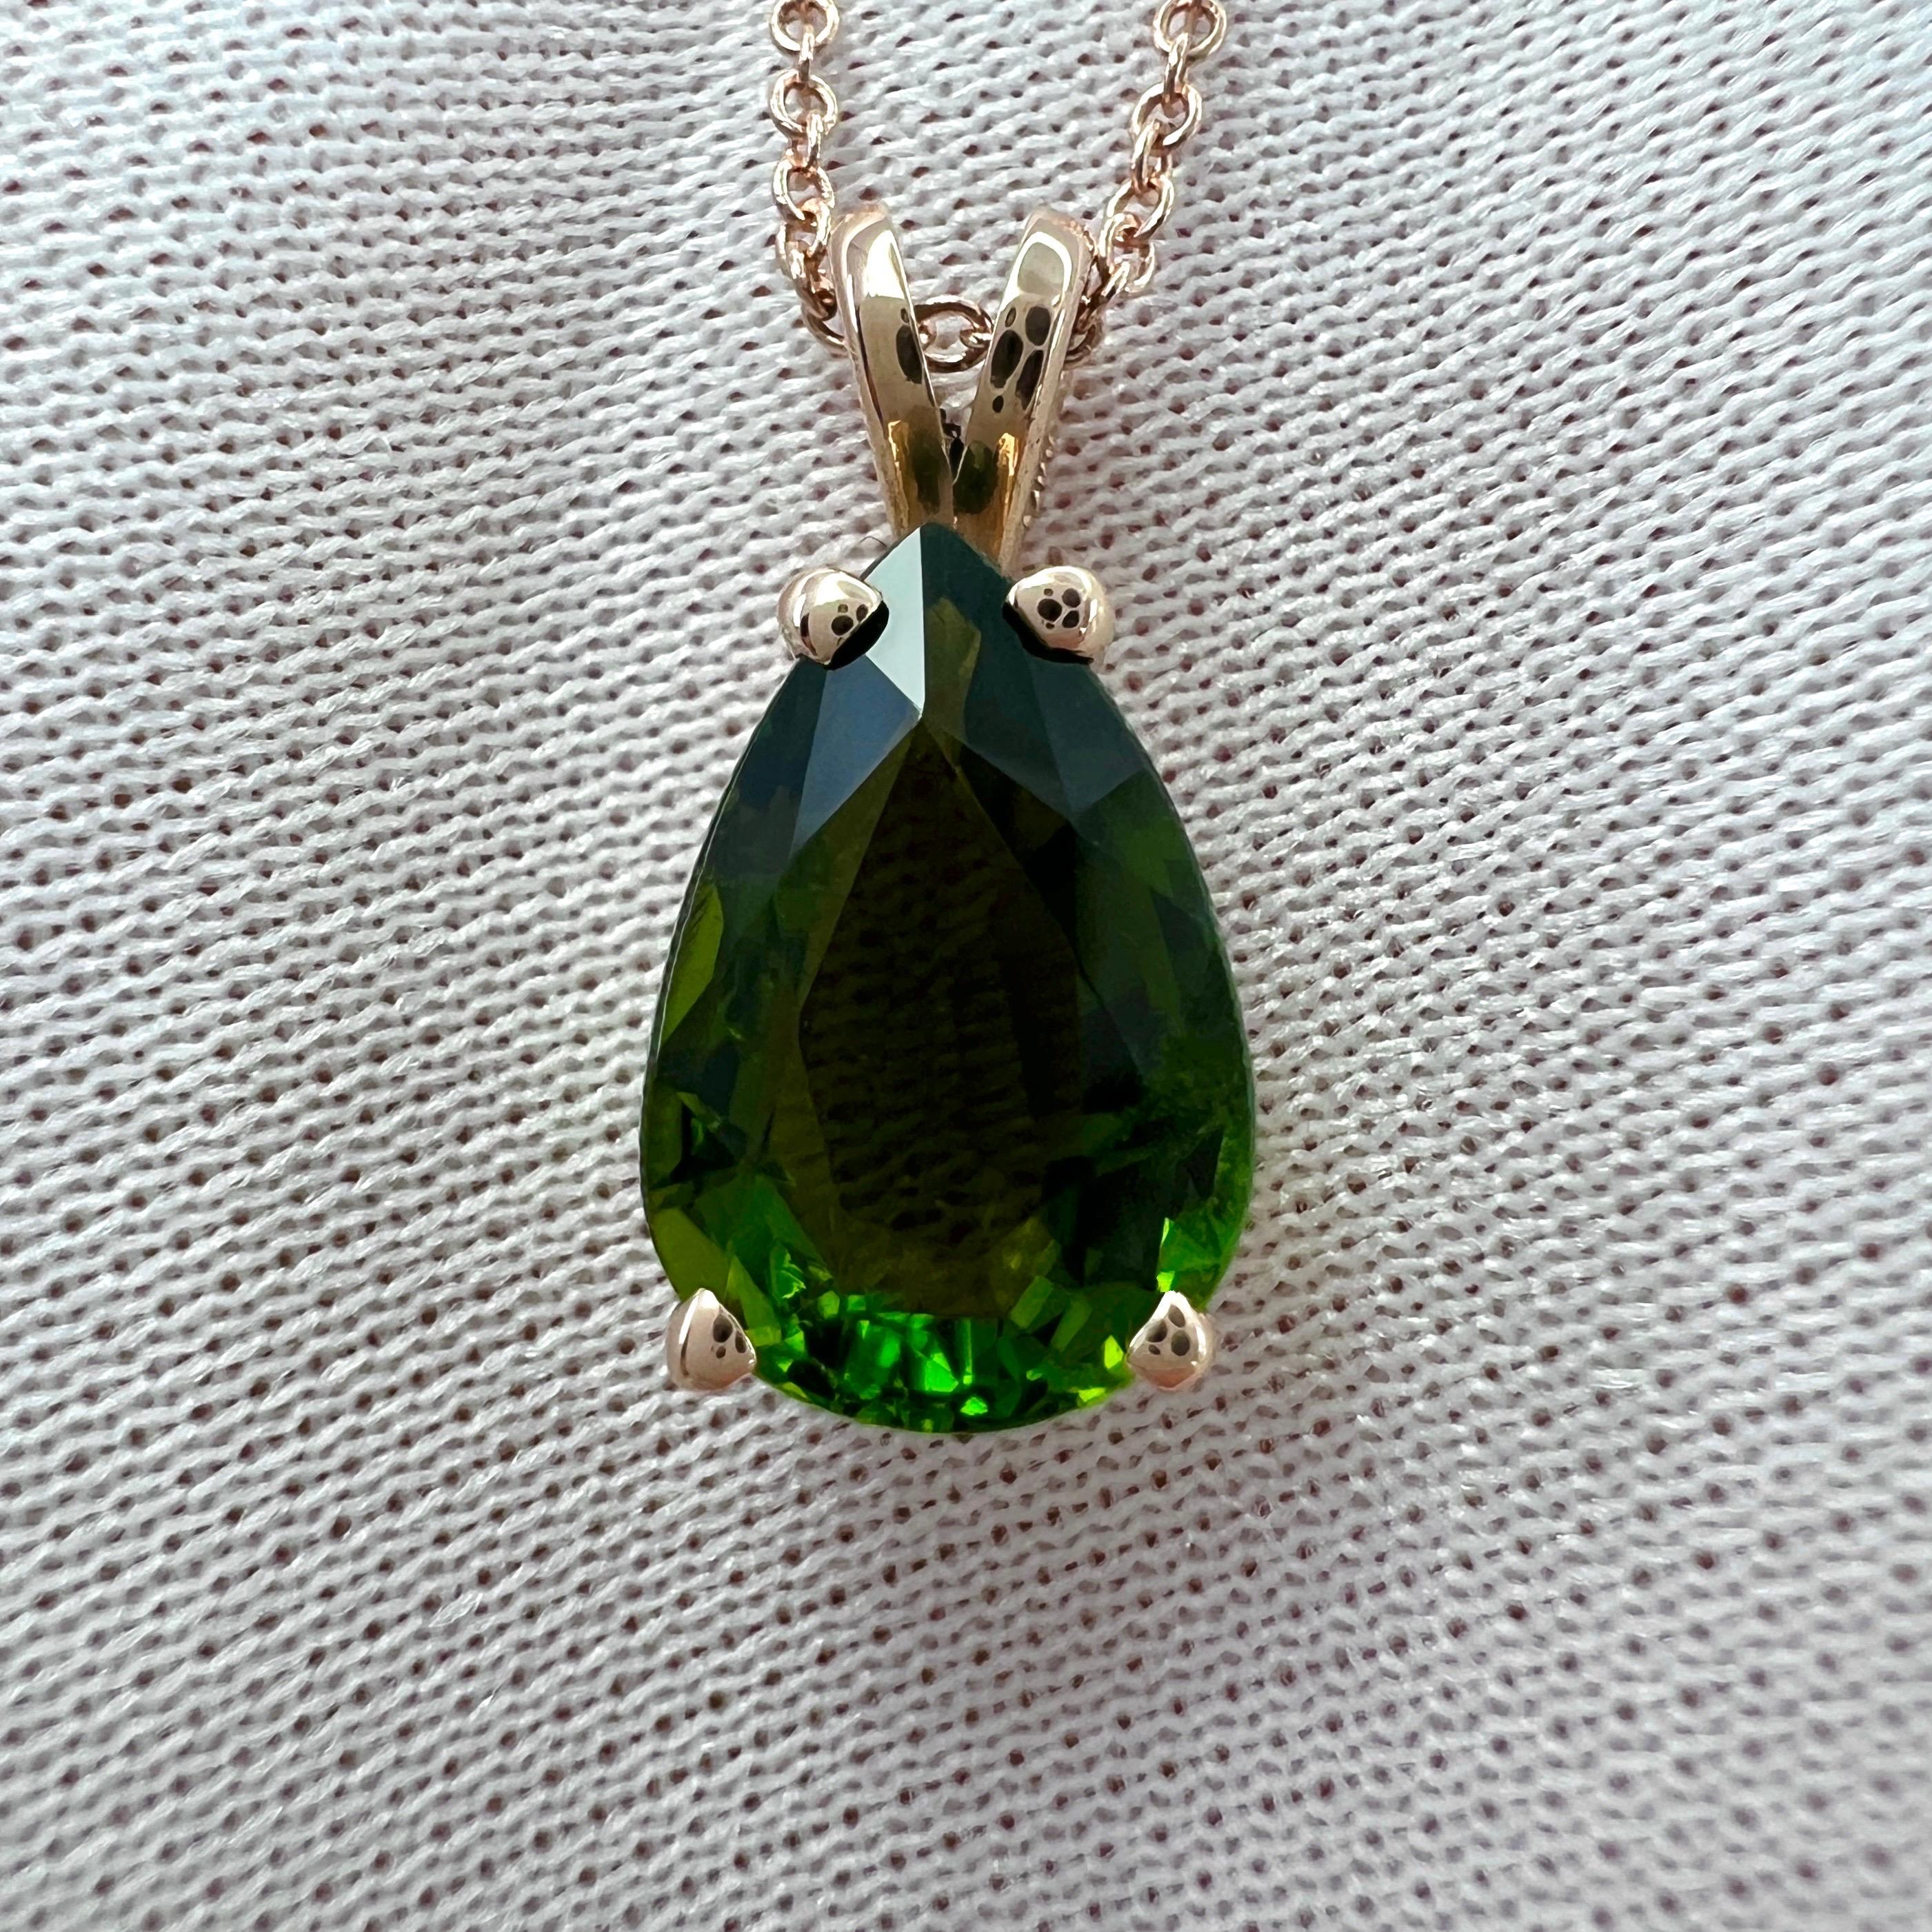 Natural Pear Teardrop Cut Green Tourmaline 14k Rose Gold Pendant Necklace. 

2.53 Carat green tourmaline with a beautiful deep green colour, excellent clarity and an excellent fancy pear cut.
Set in a fine 14k rose gold solitaire pendant.

The stone